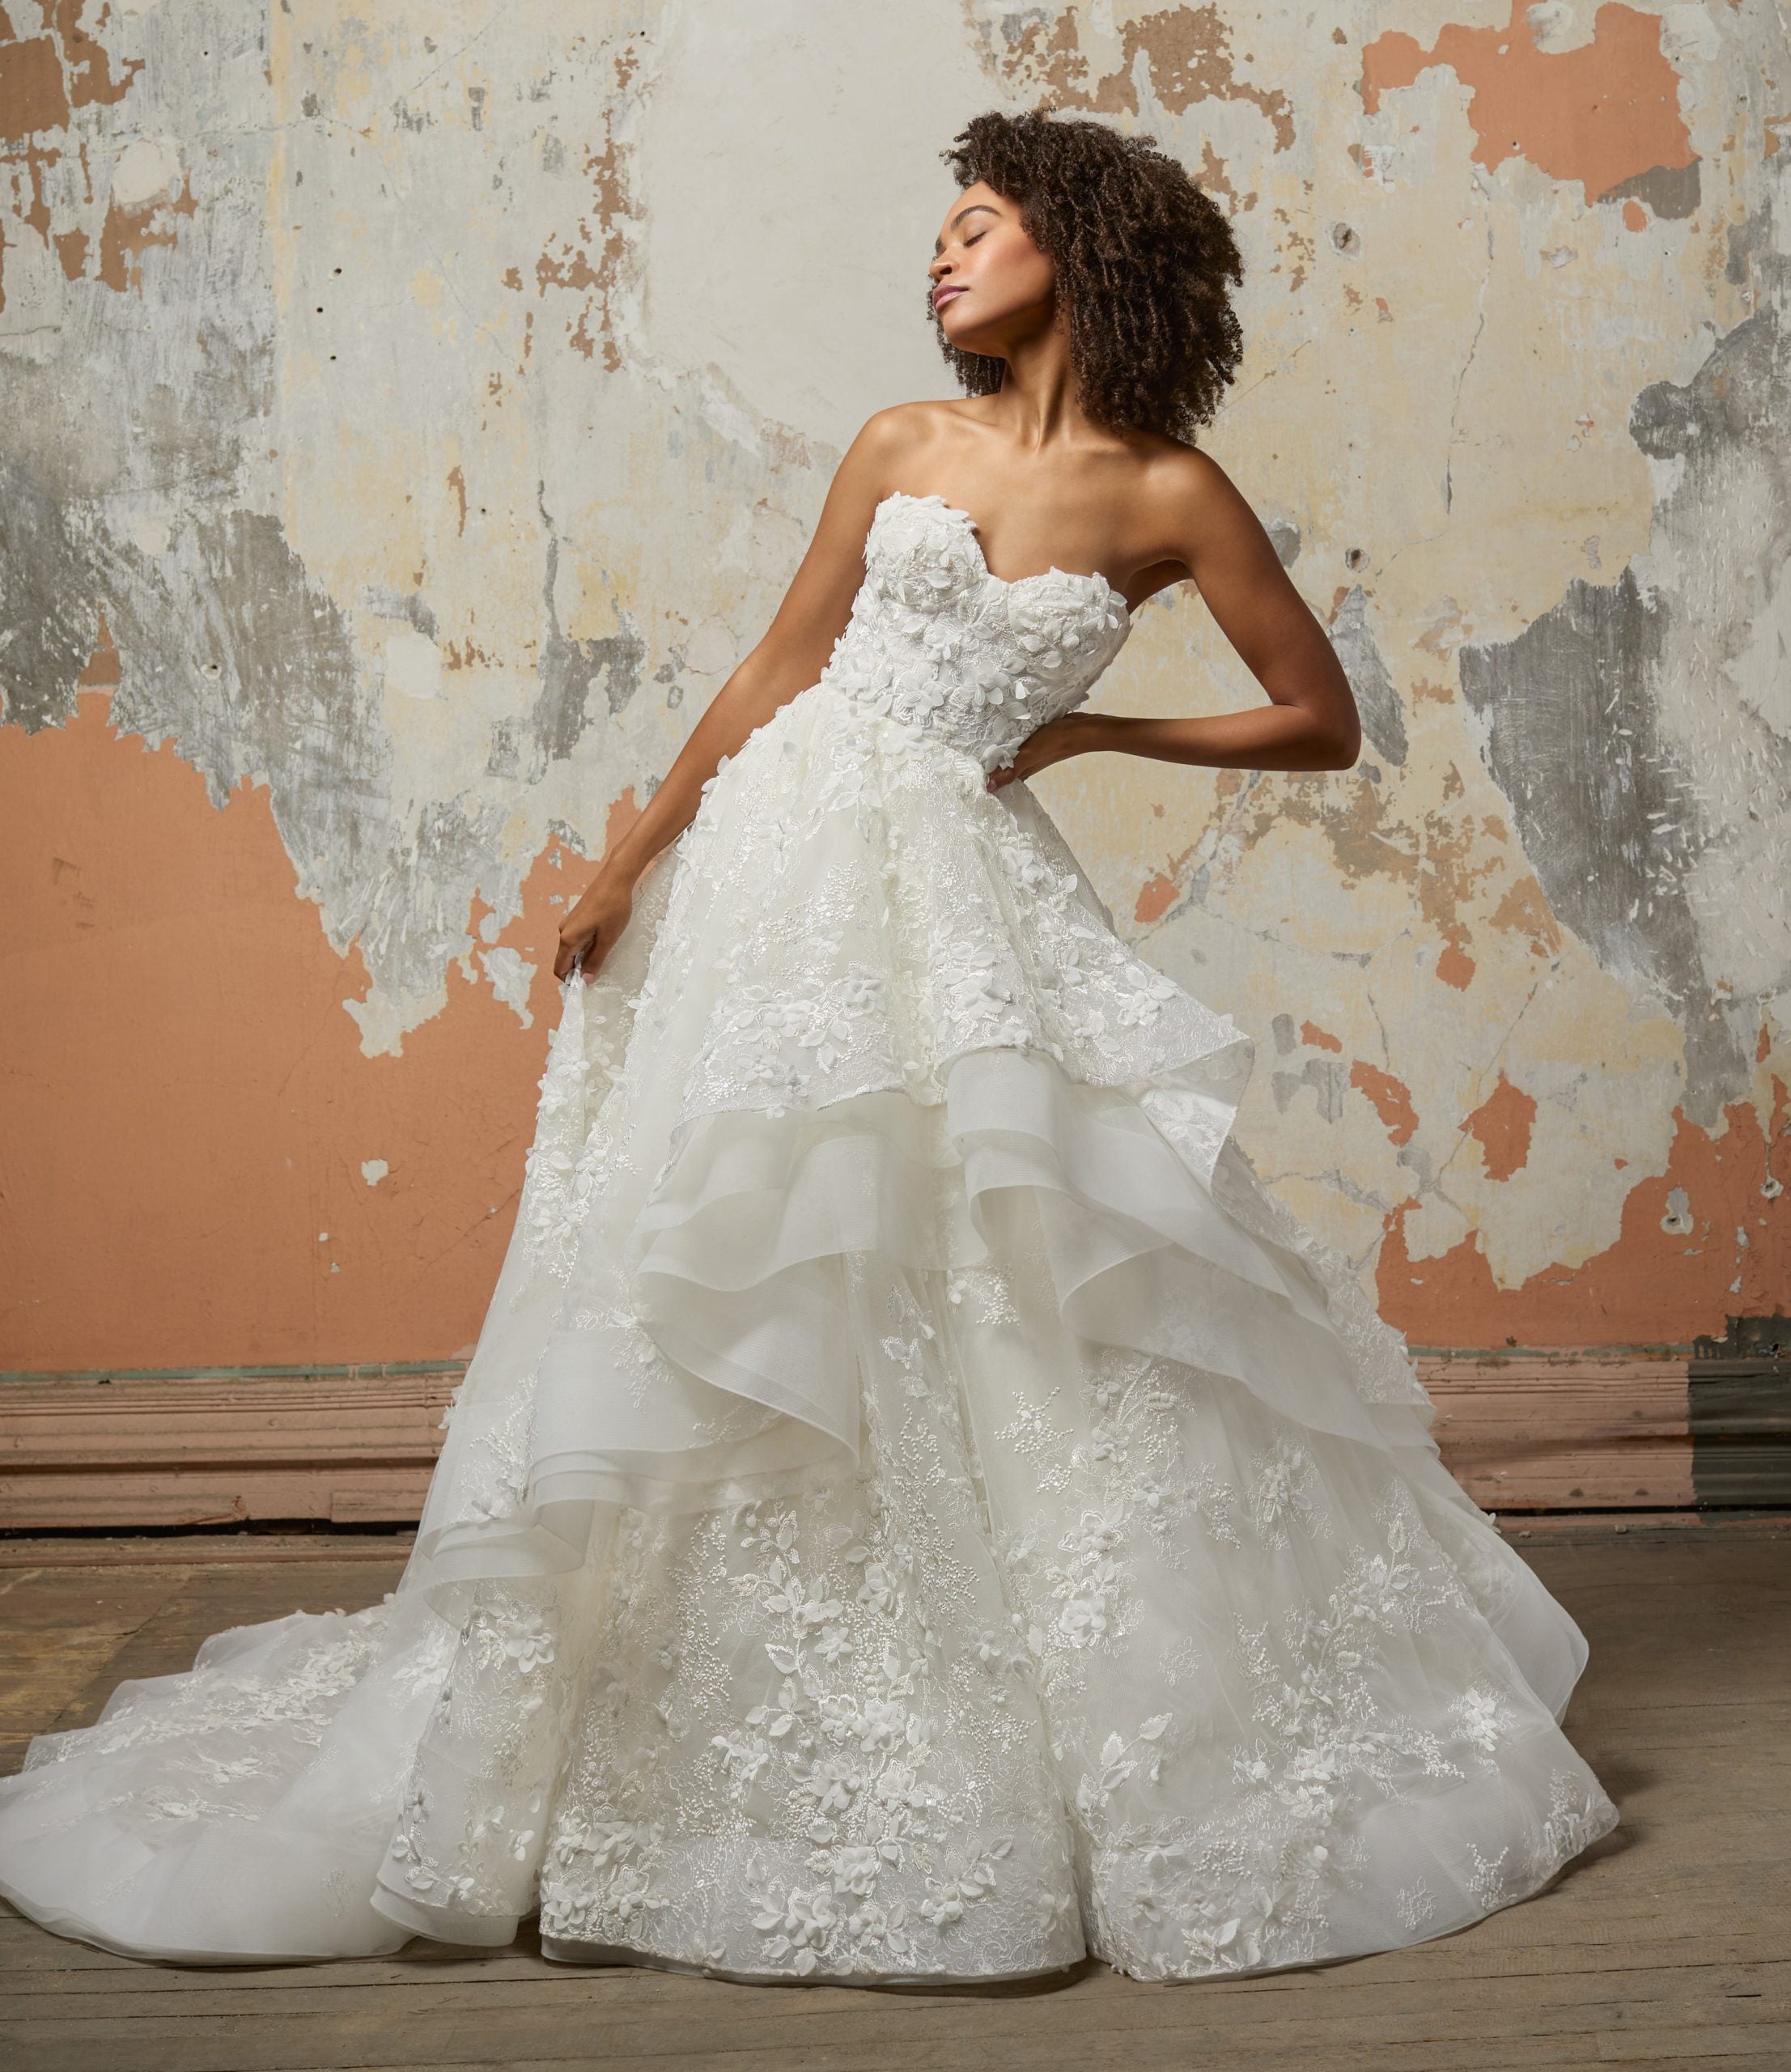 Chic And Romantic Tiered Ball Gown by Lazaro - Image 1